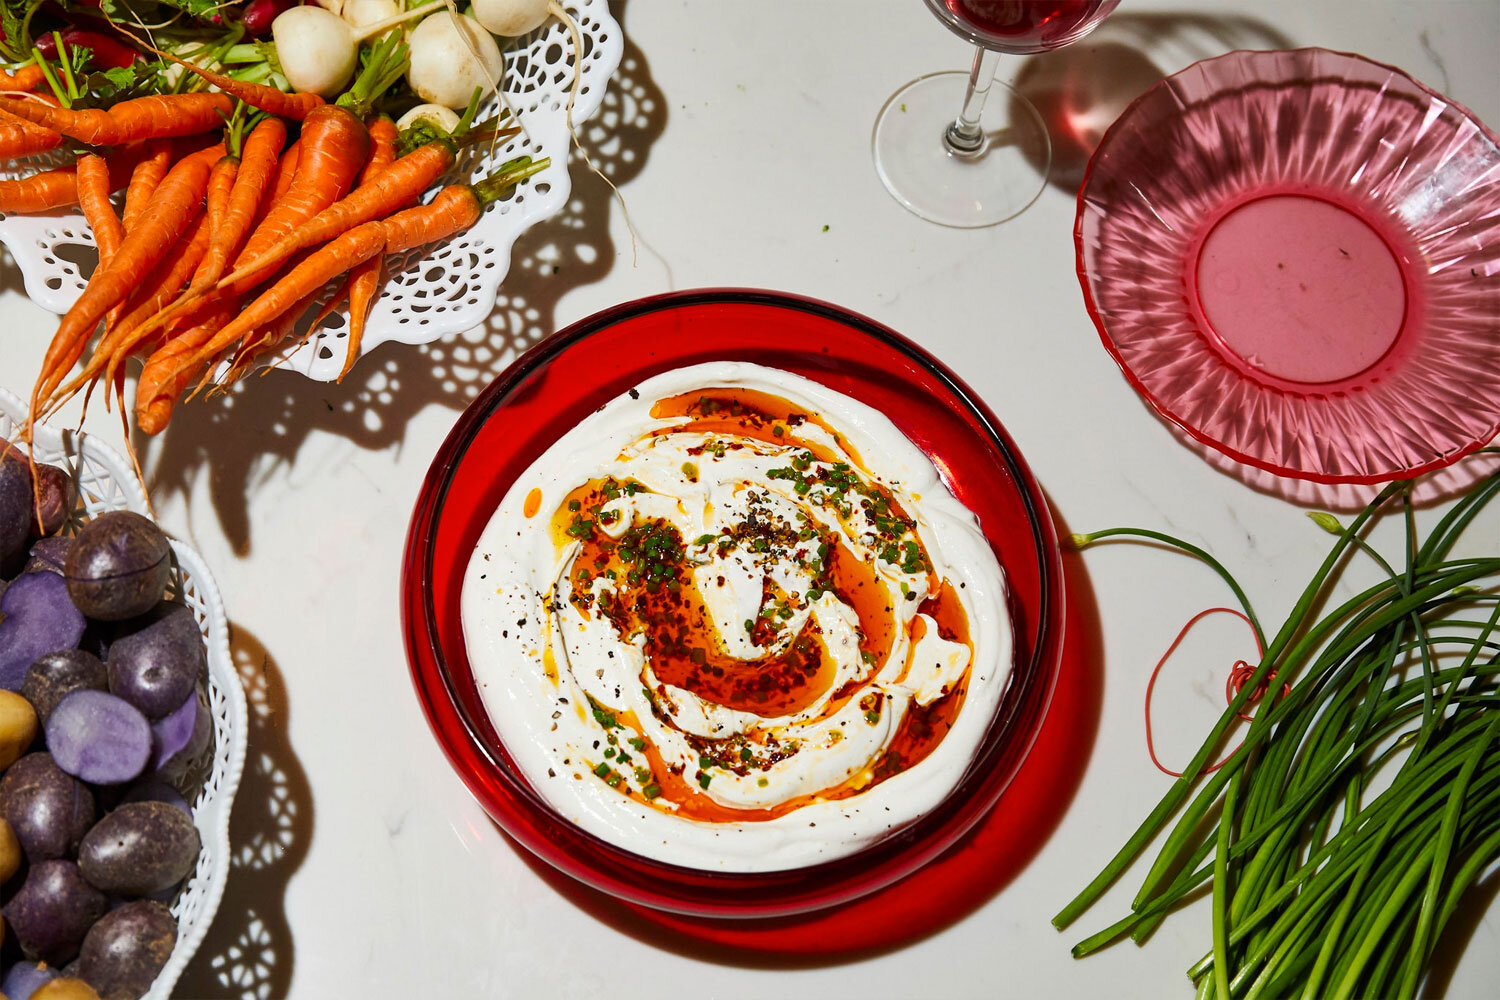 Caviar Sour Cream Dip With Potato Chips Recipe - NYT Cooking